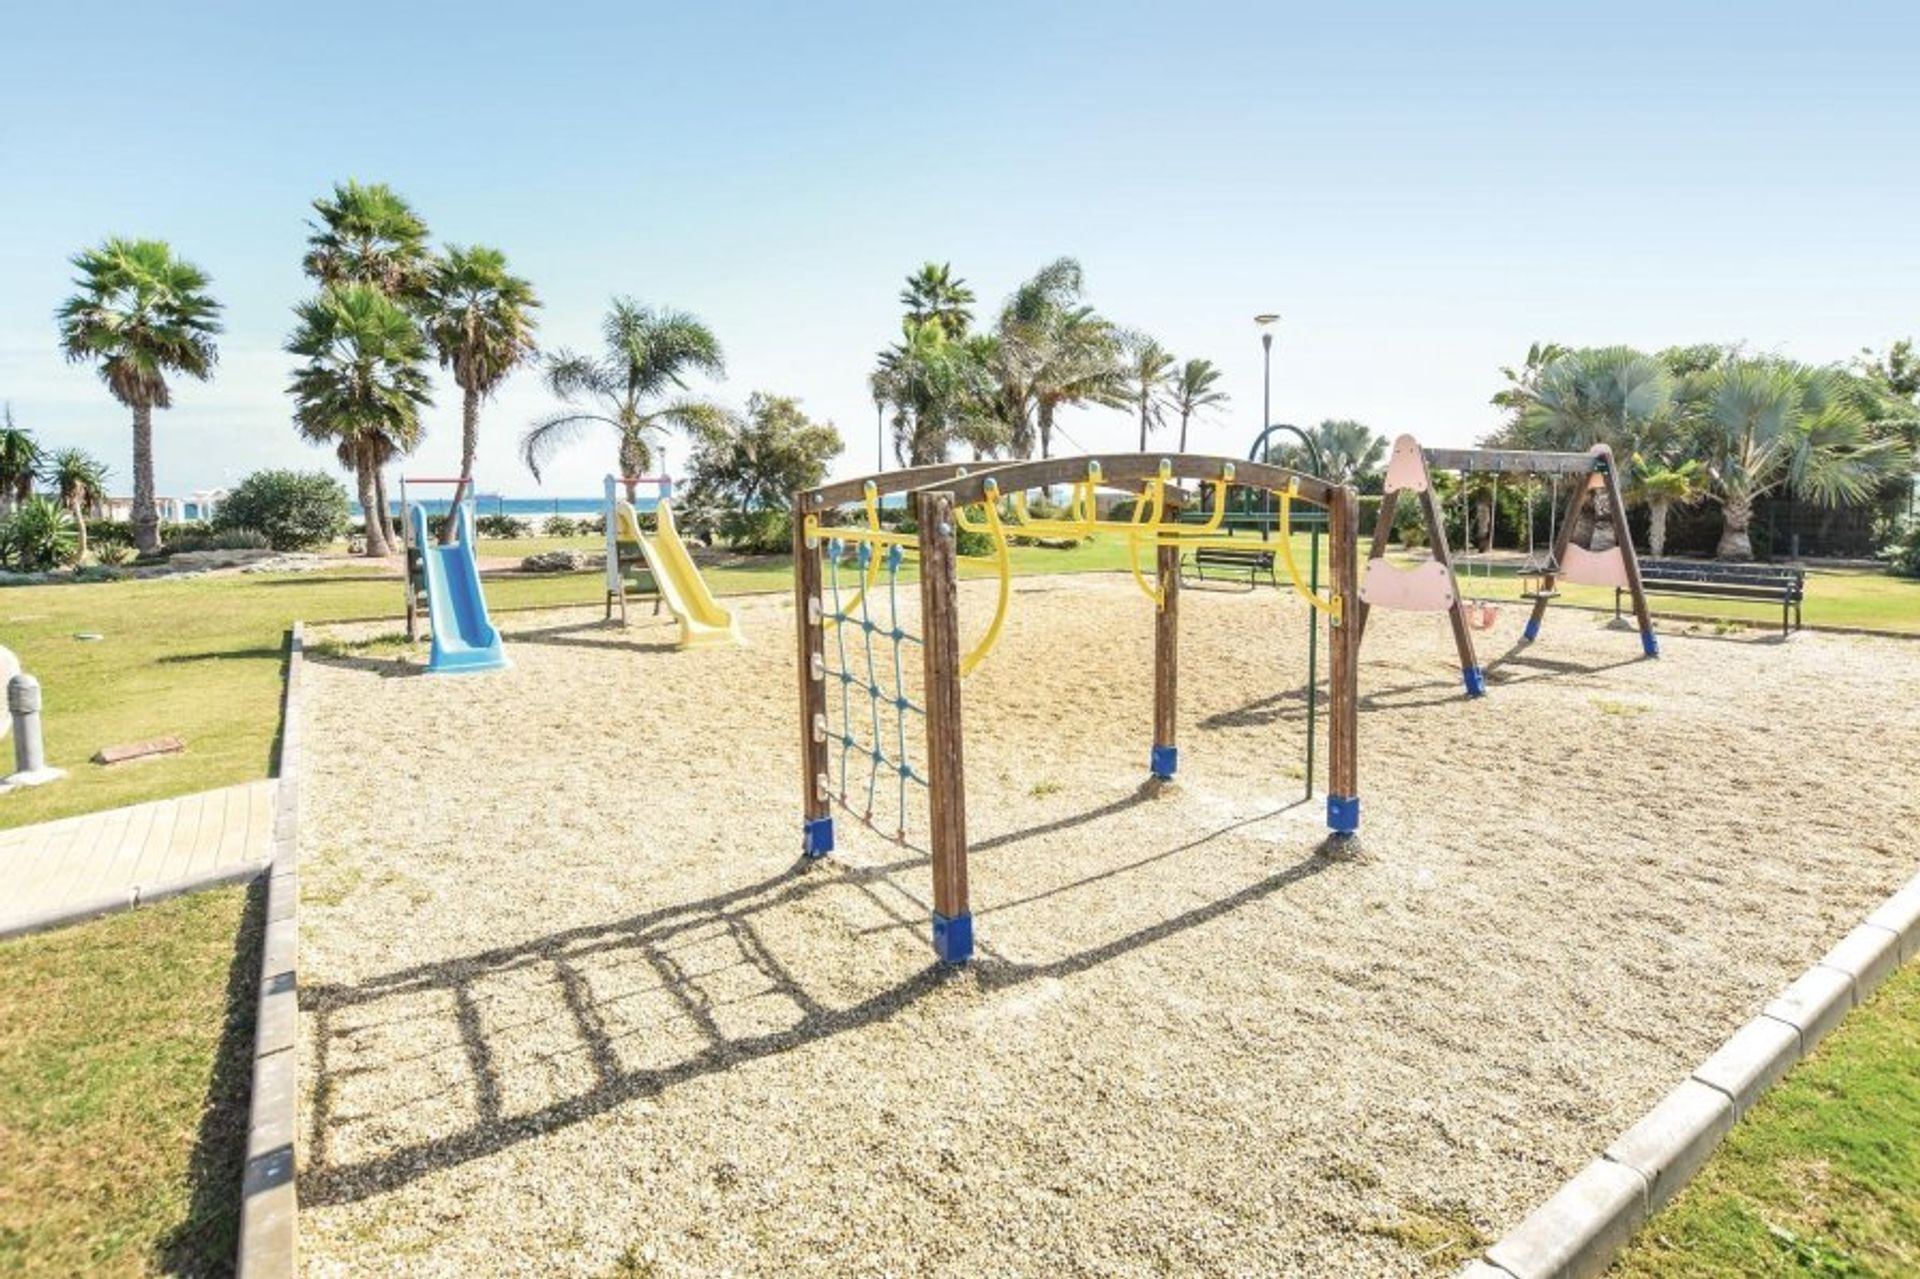 Keep the kids entertained at one of the many child-friendly parks dotted along Playas de Vera's coastline